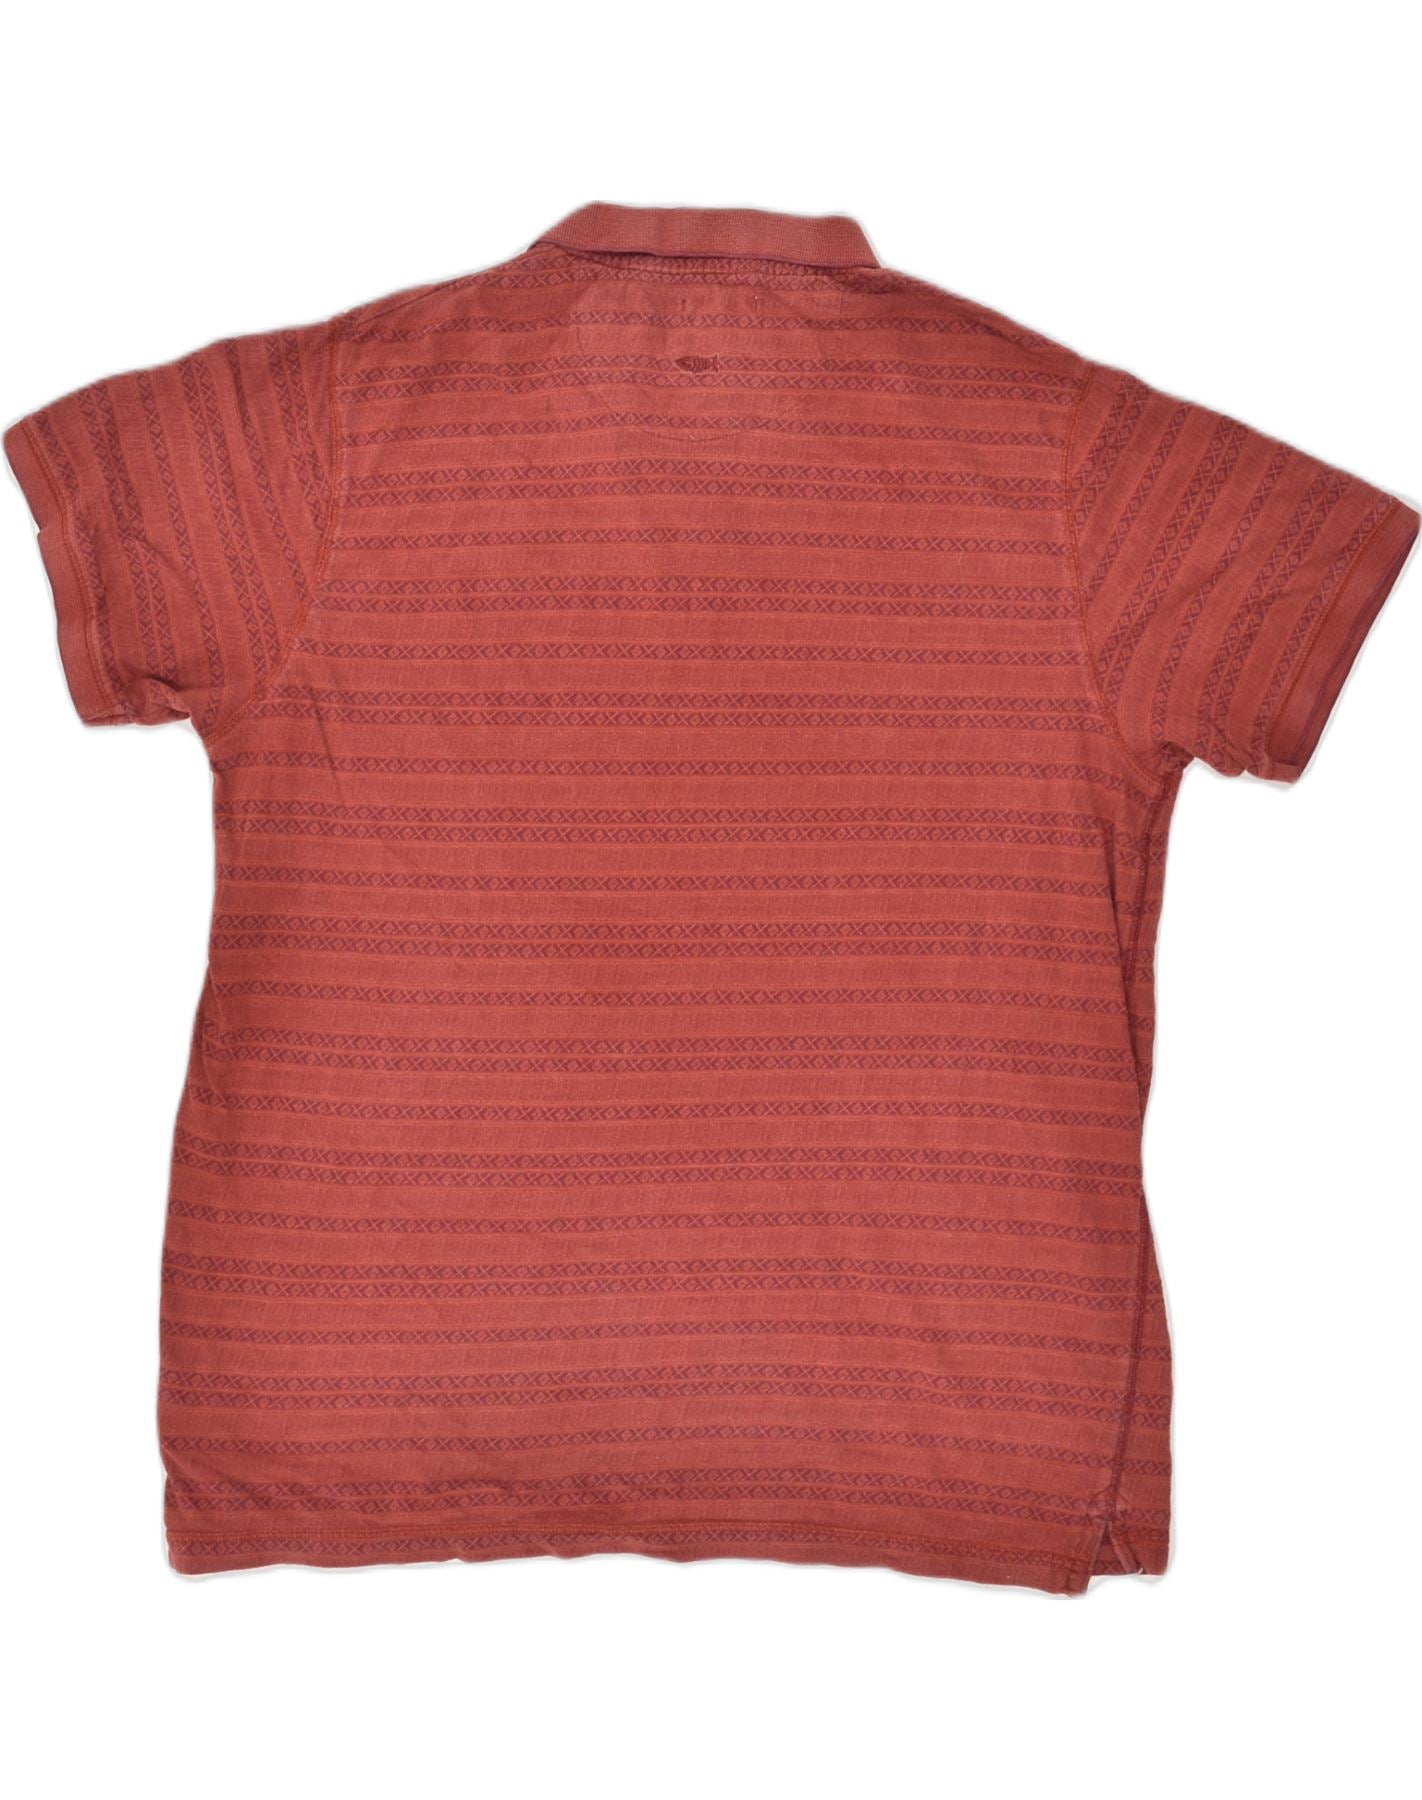 WEIRD FISH Mens Polo Shirt XL Red Striped Cotton, Vintage & Second-Hand  Clothing Online